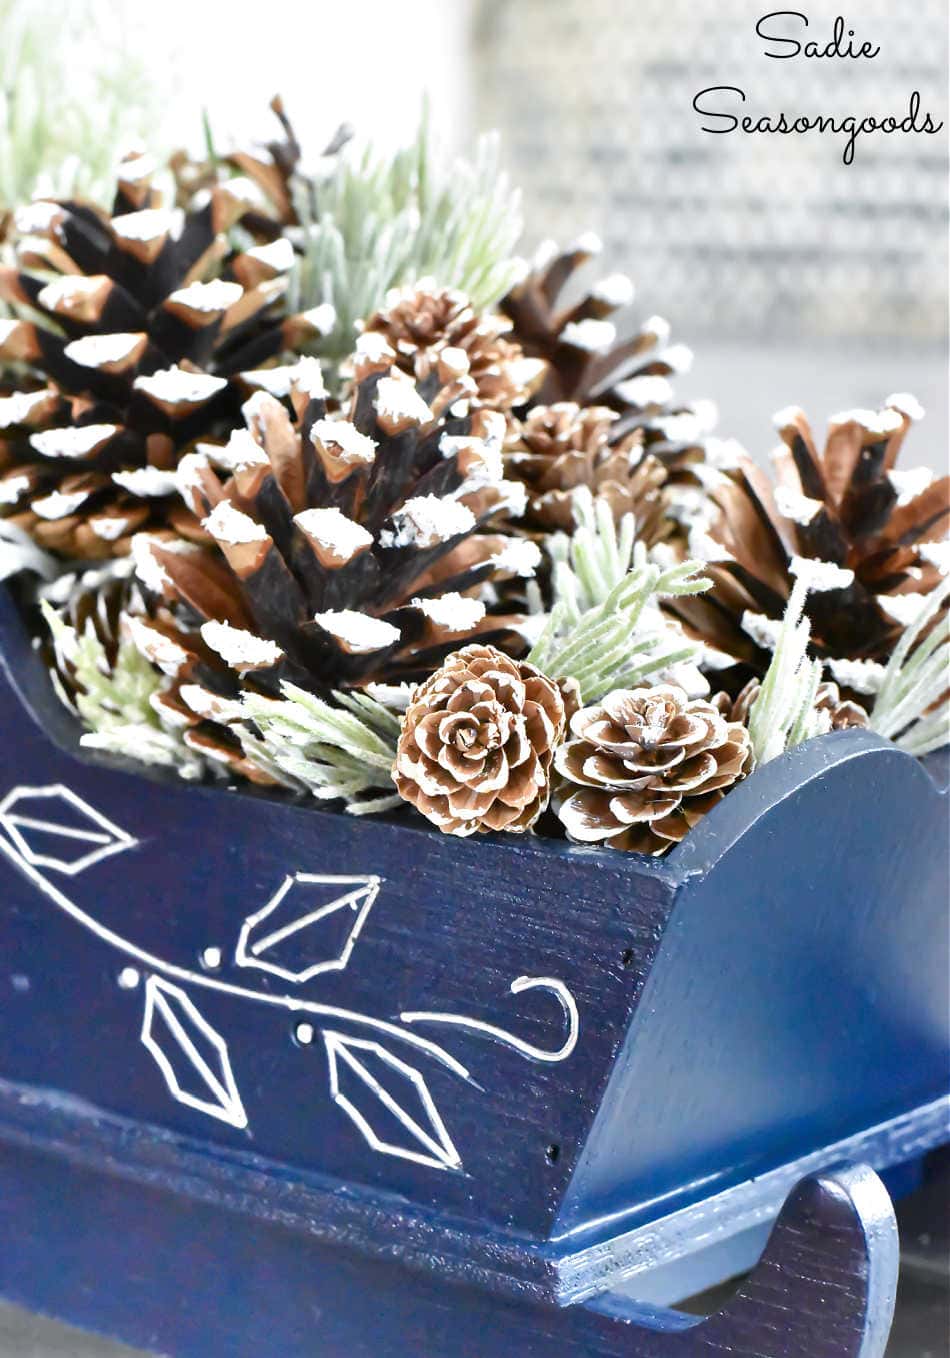 january decorations with pine cones and winter greenery